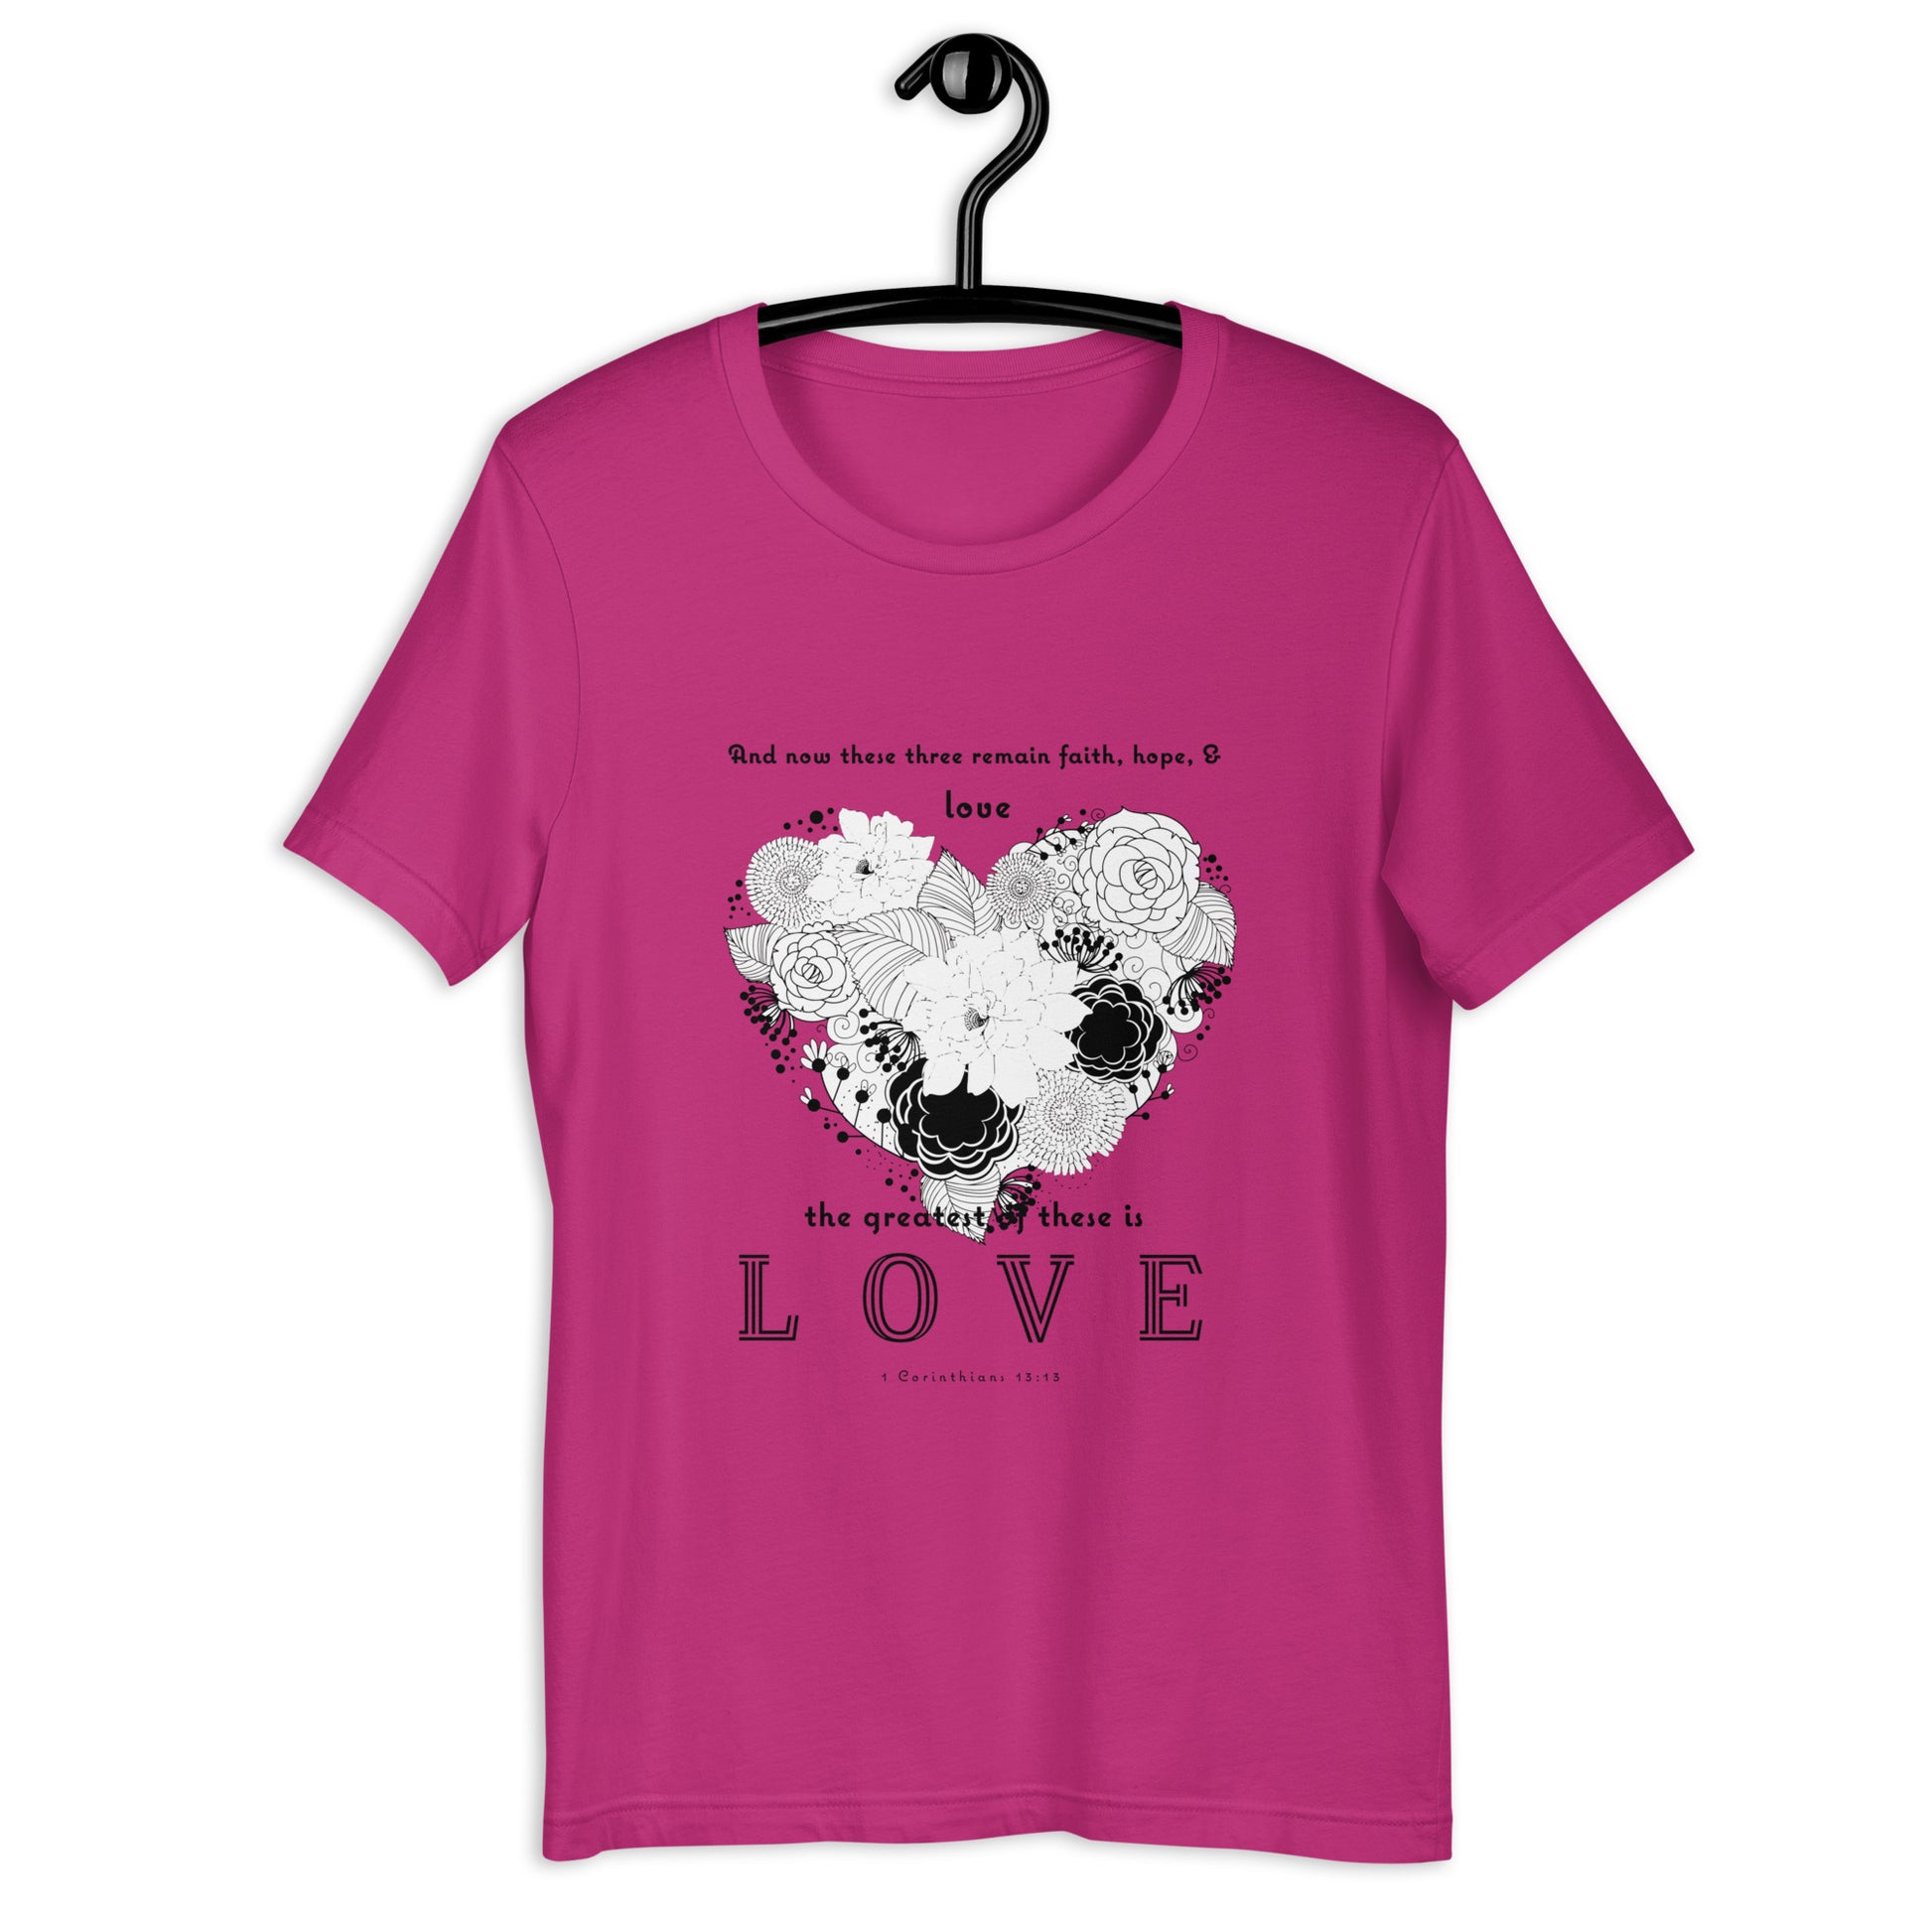 1 Corinthians 13:13 Greatest Love T-Shirt in Berry - on hanger front view